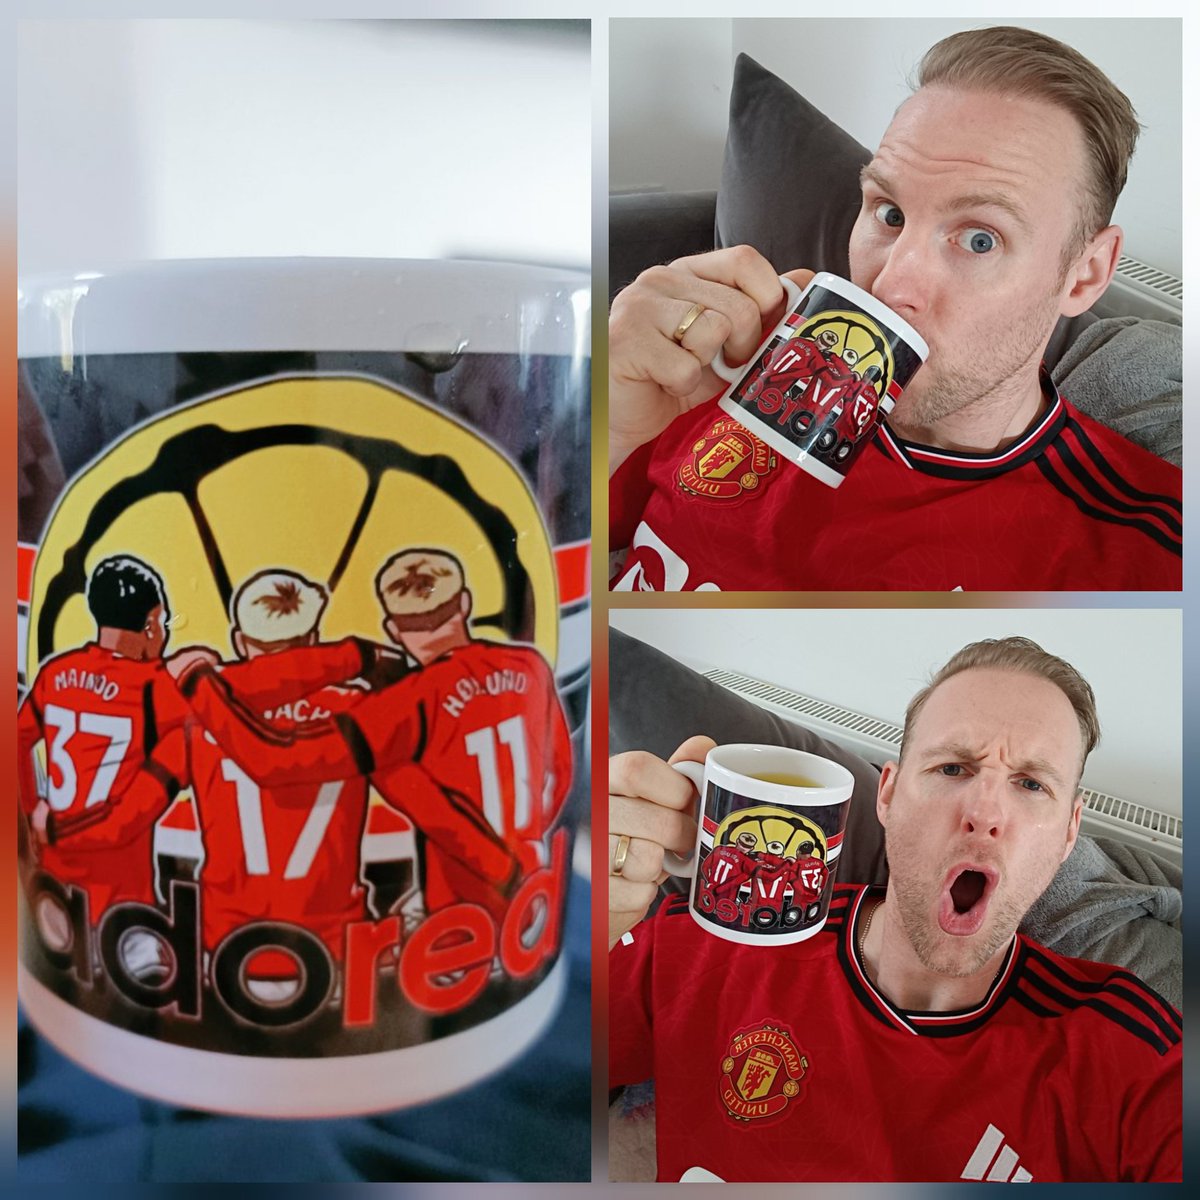 adoRED 'The Future' mugs Available here utdadored.co.uk/product-page/a… Please RePost Cheers